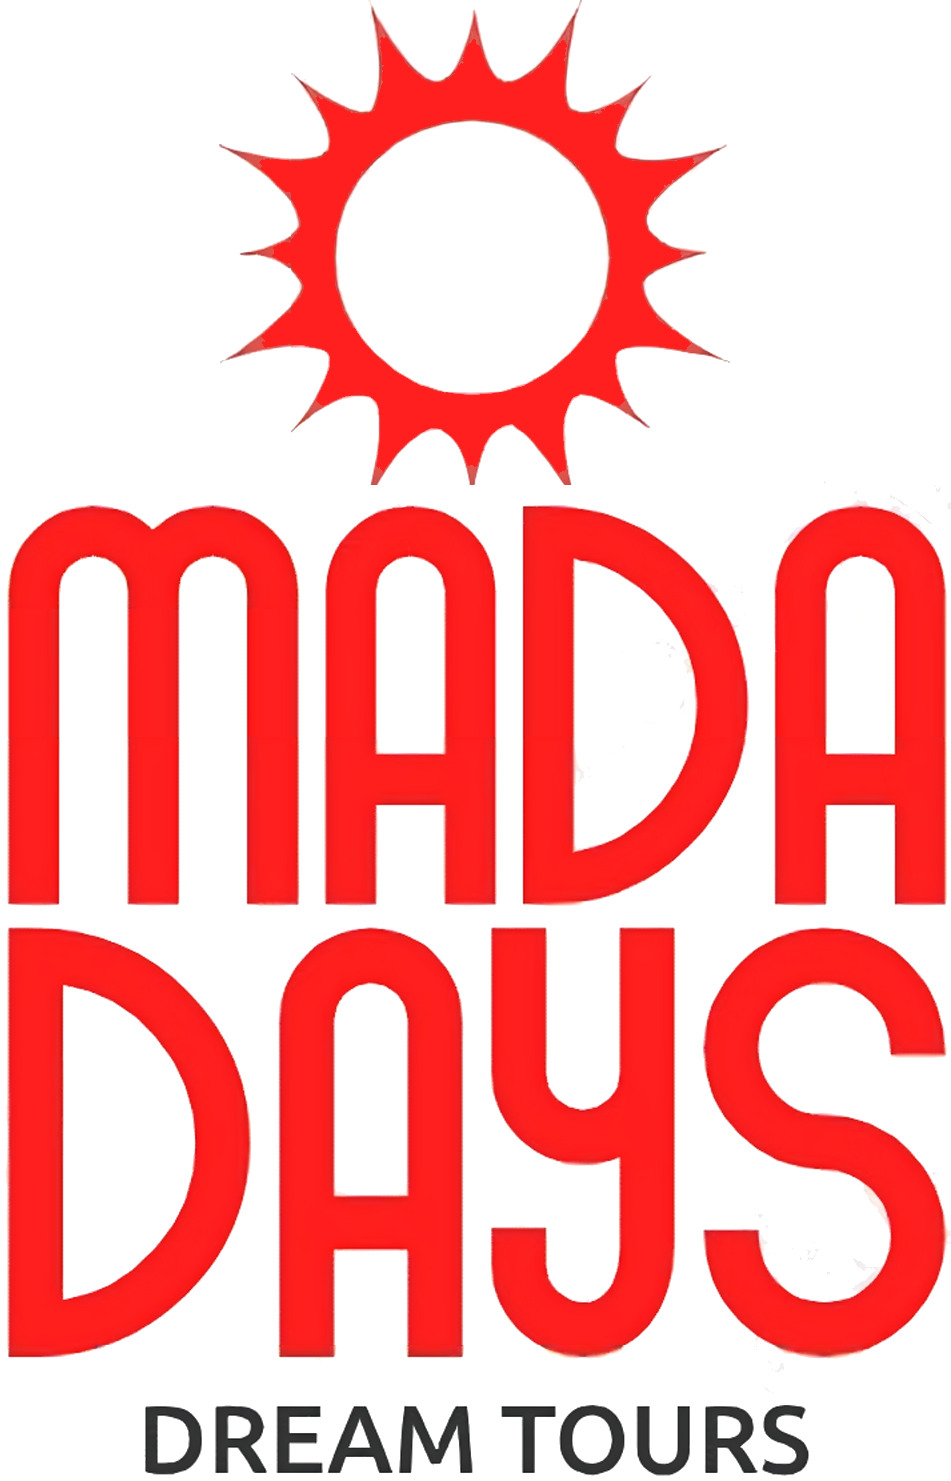 Madadays logo, which includes the name of our business, the text "dream tours" and the symbol of a sun